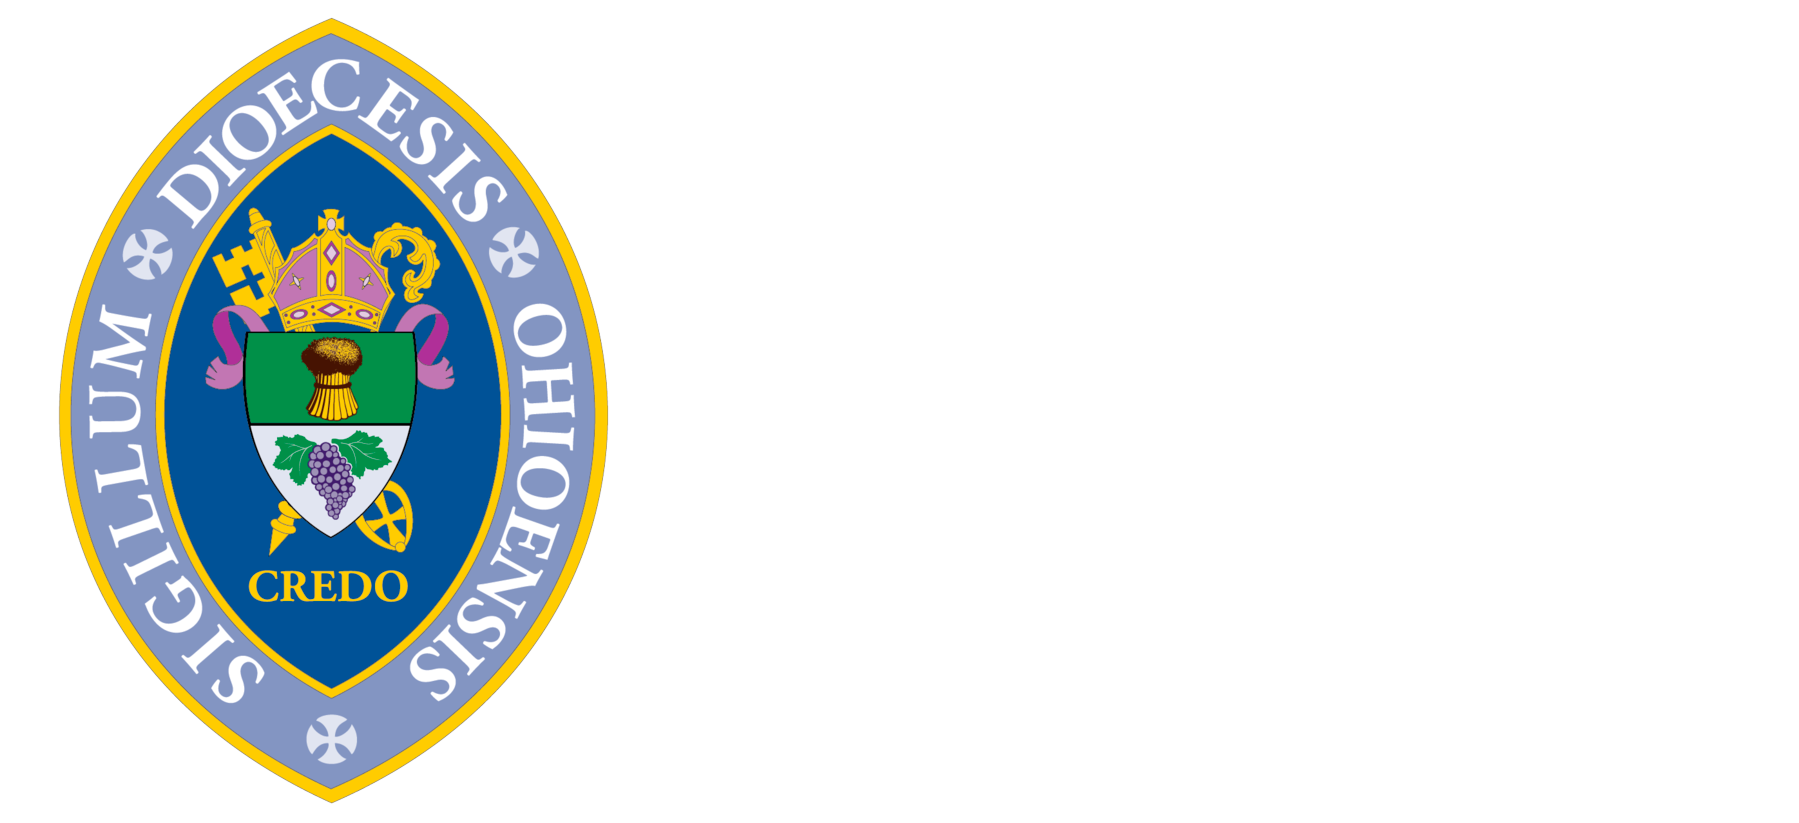 Episcopal Diocese of Ohio